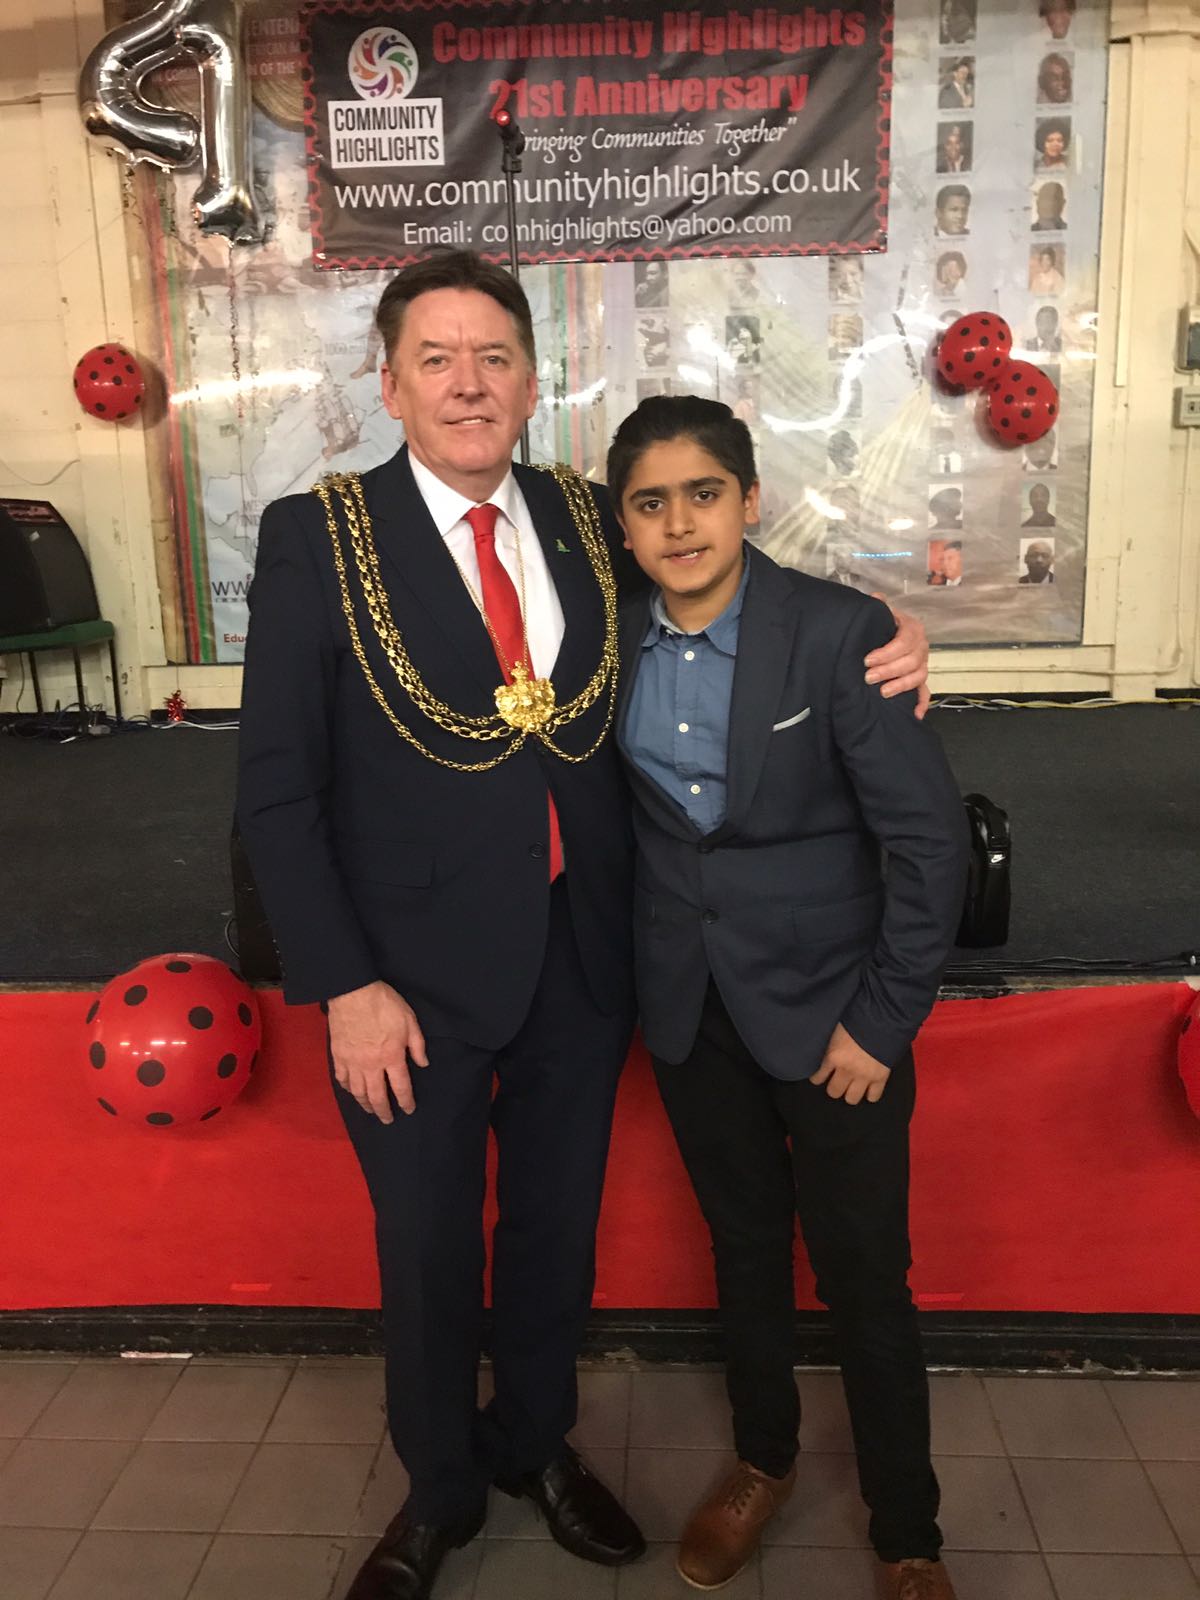 Lord Mayor Gerry Harper and Faraz The Magician